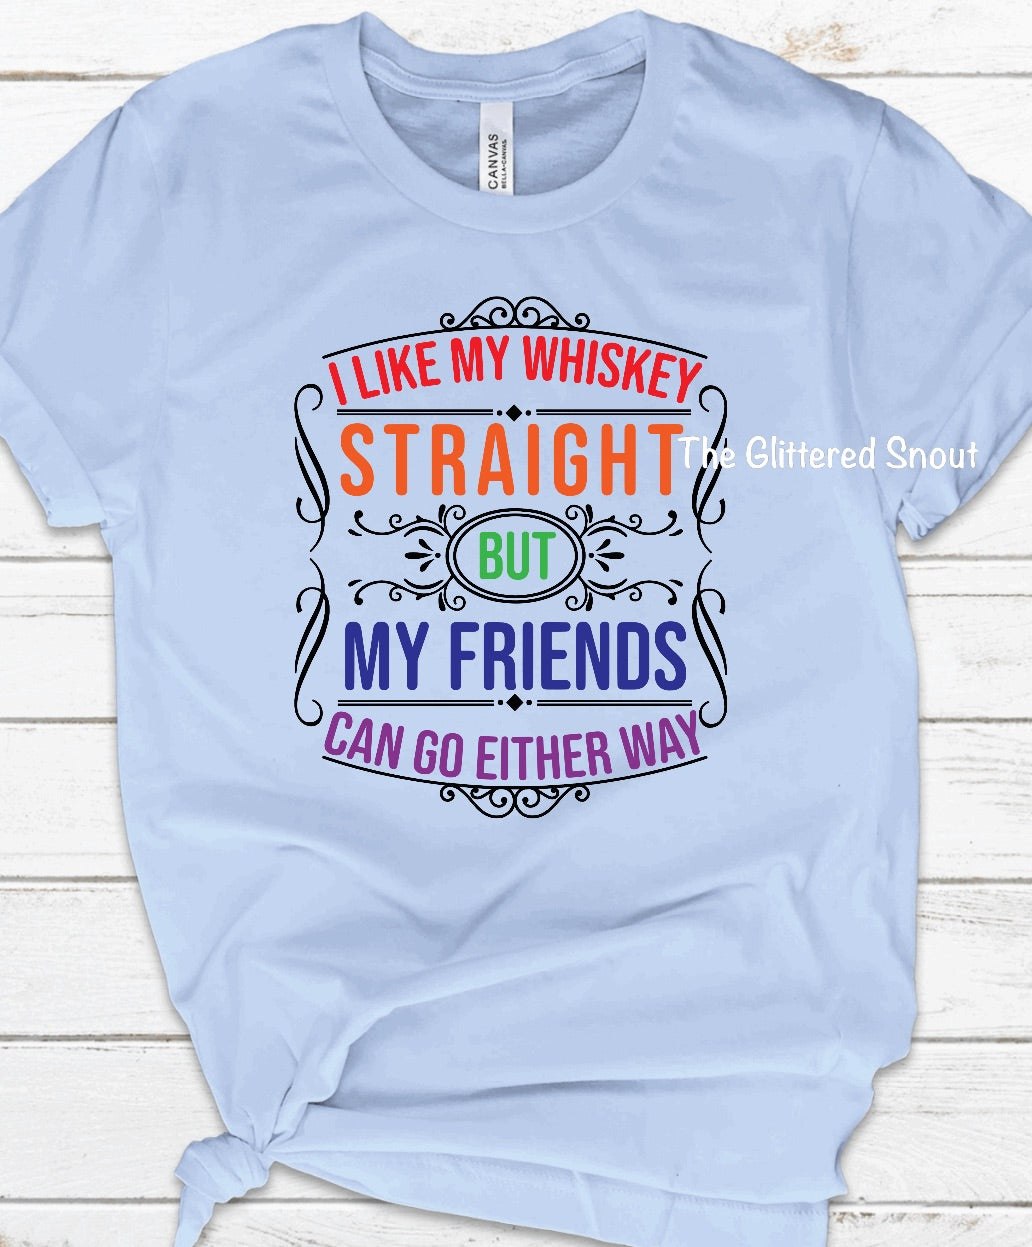 I like my whiskey straight, but my friends can go either way (rainbow)